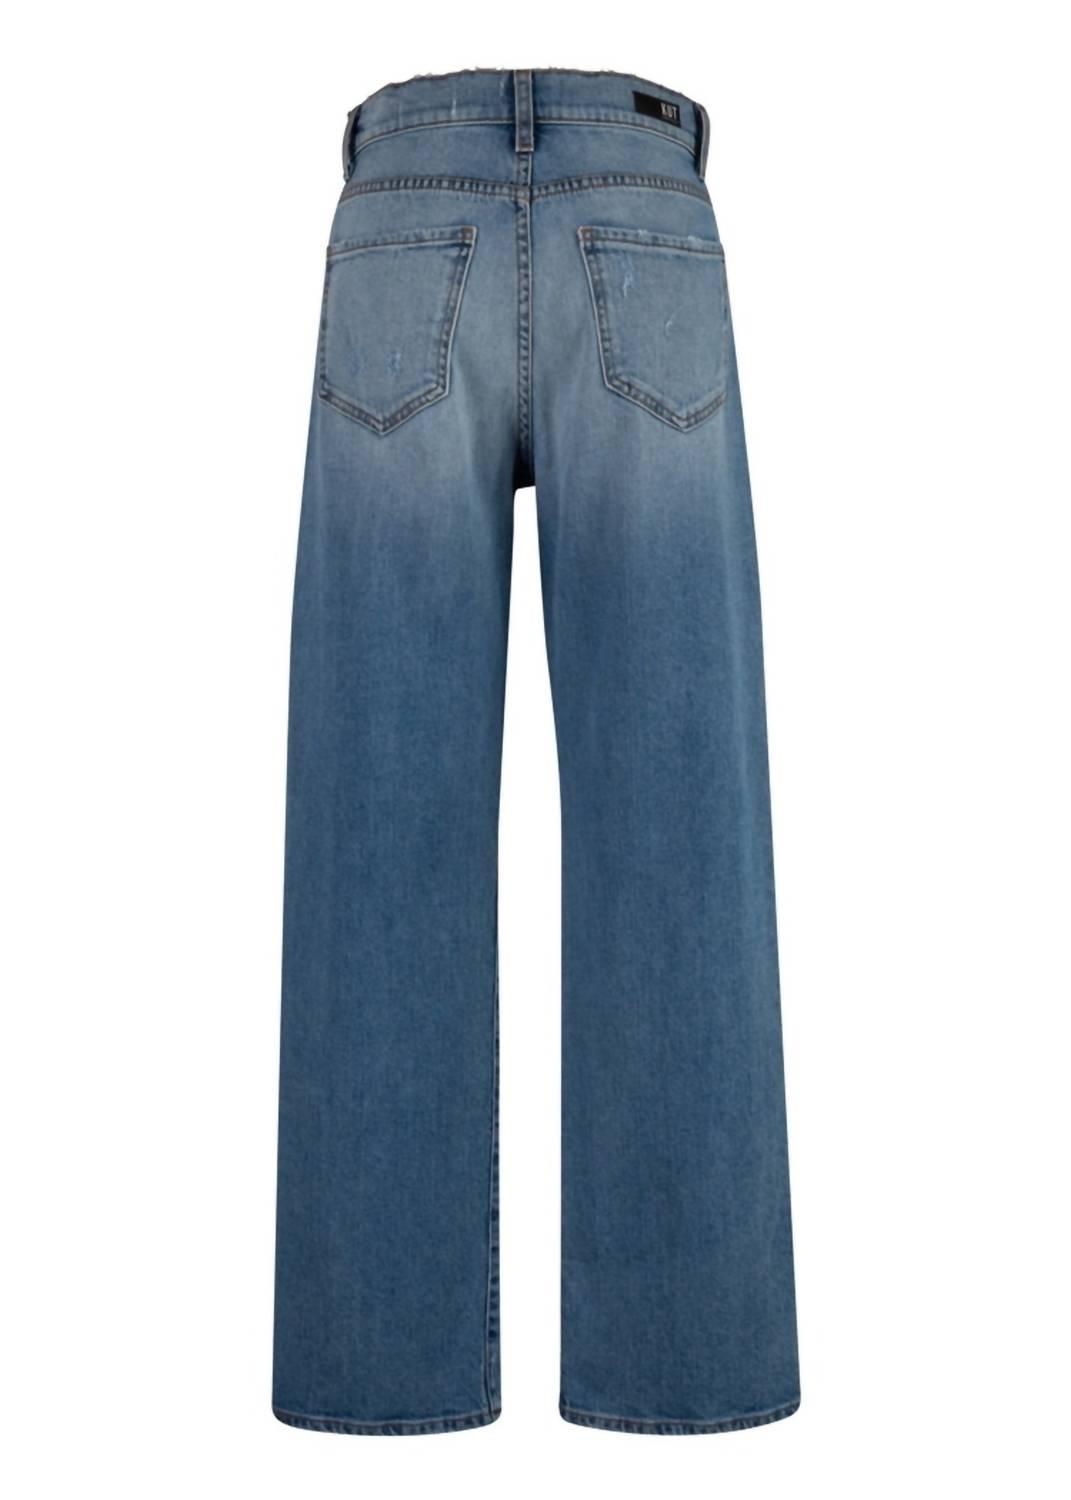 Kut From The Kloth Sienna High Rise Wide Leg Jeans in Blue | Lyst